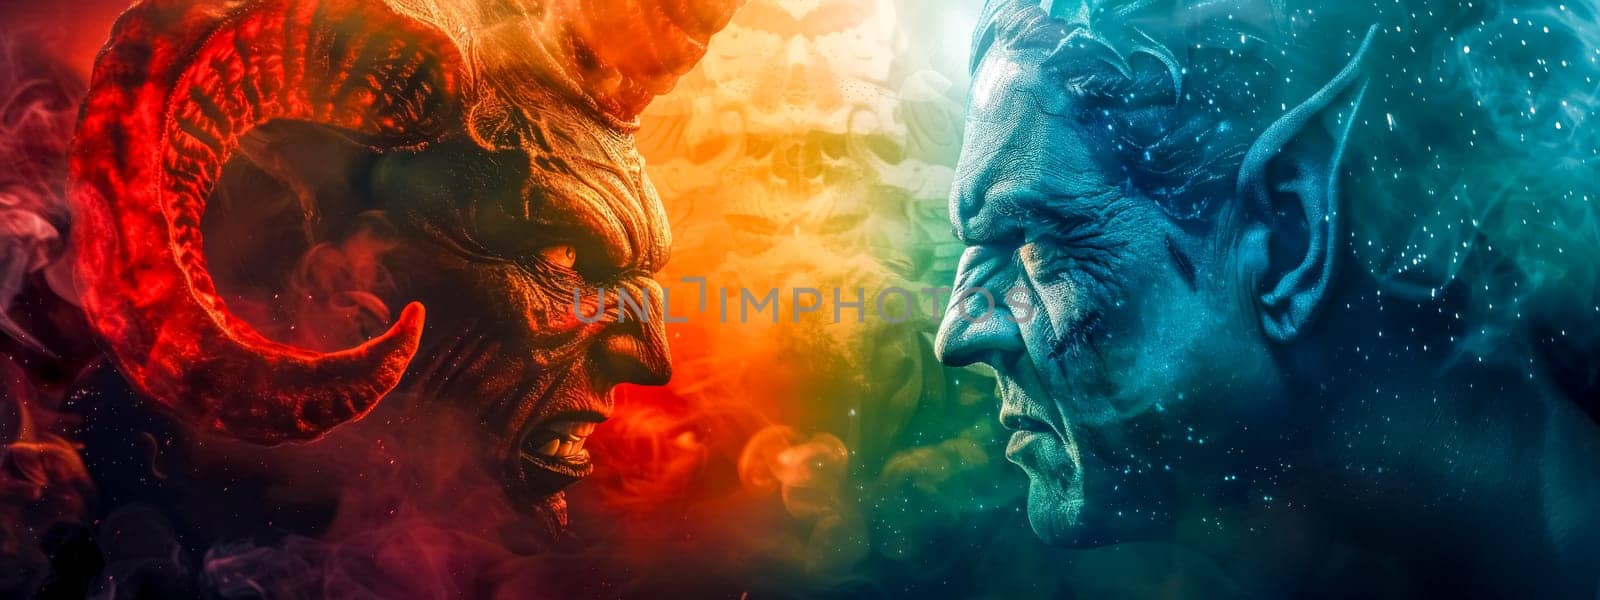 Mystic battle - red devil and blue demon face off by Edophoto